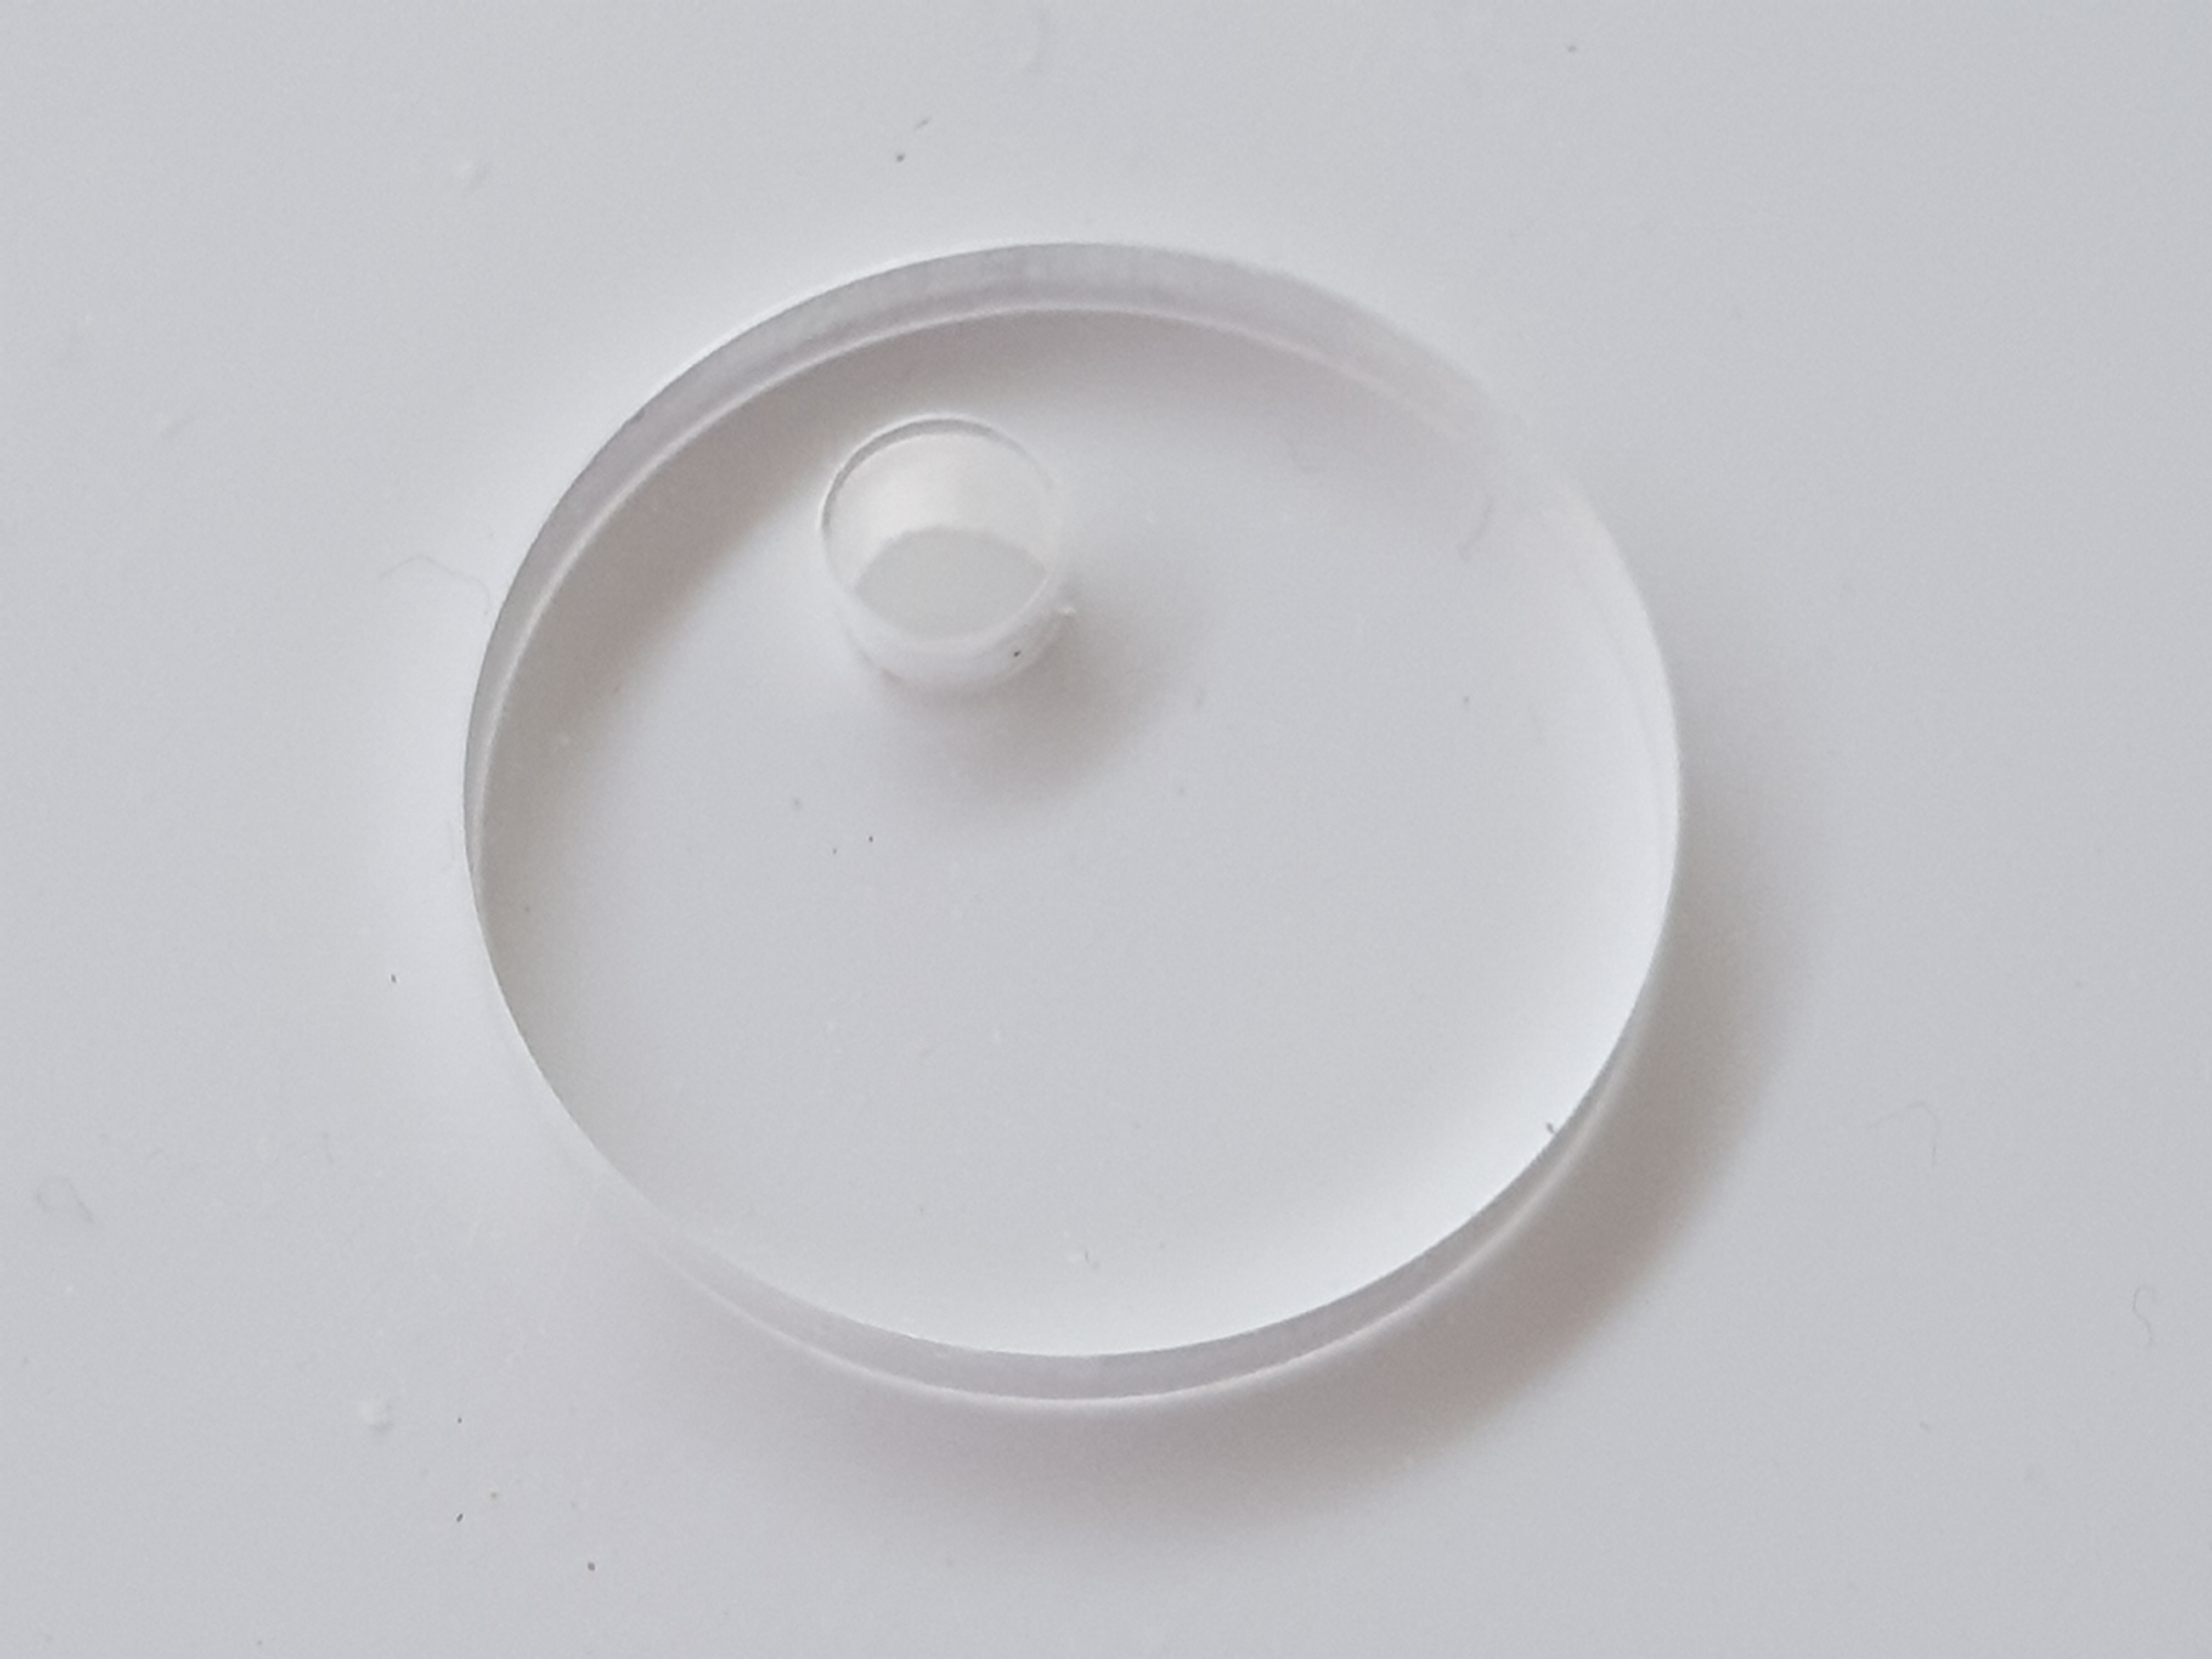 A simple acrylic disc for machining accuracy check